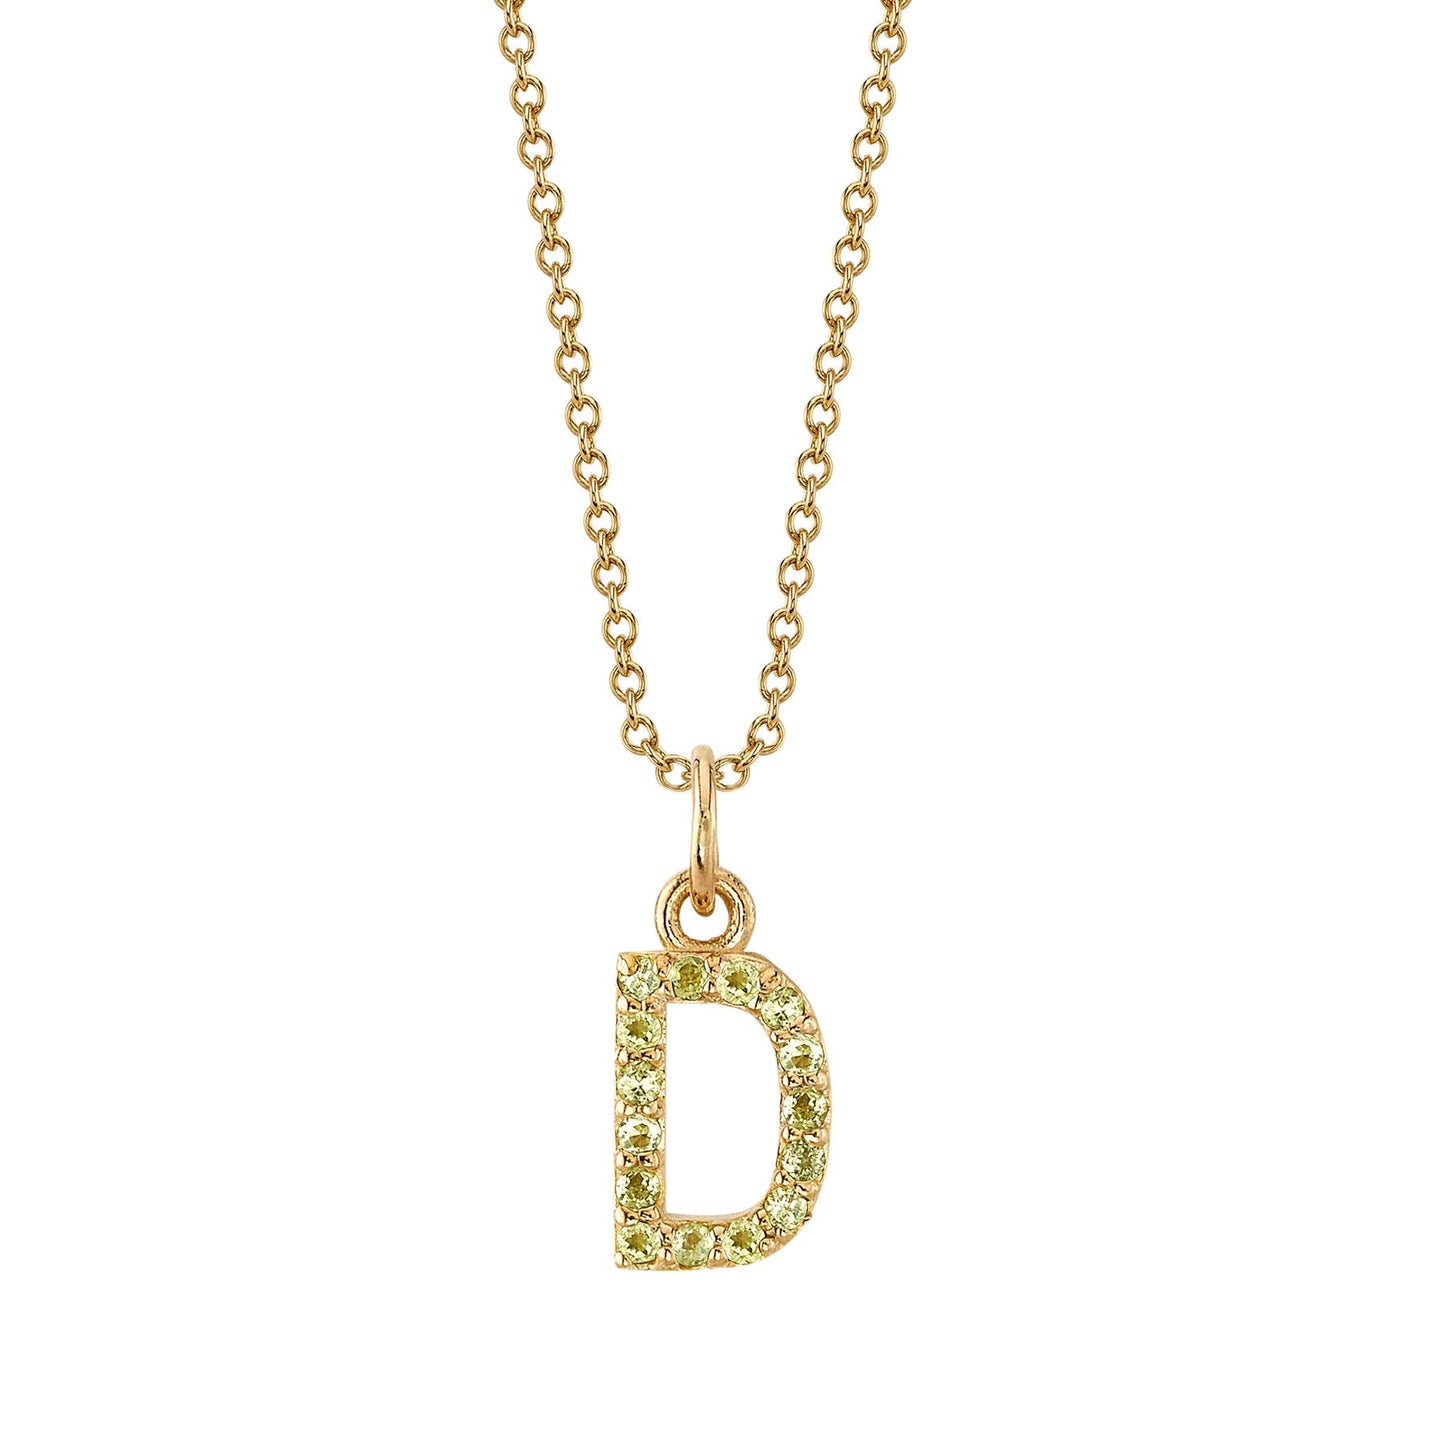 D Initial Birthstone Charm Necklace